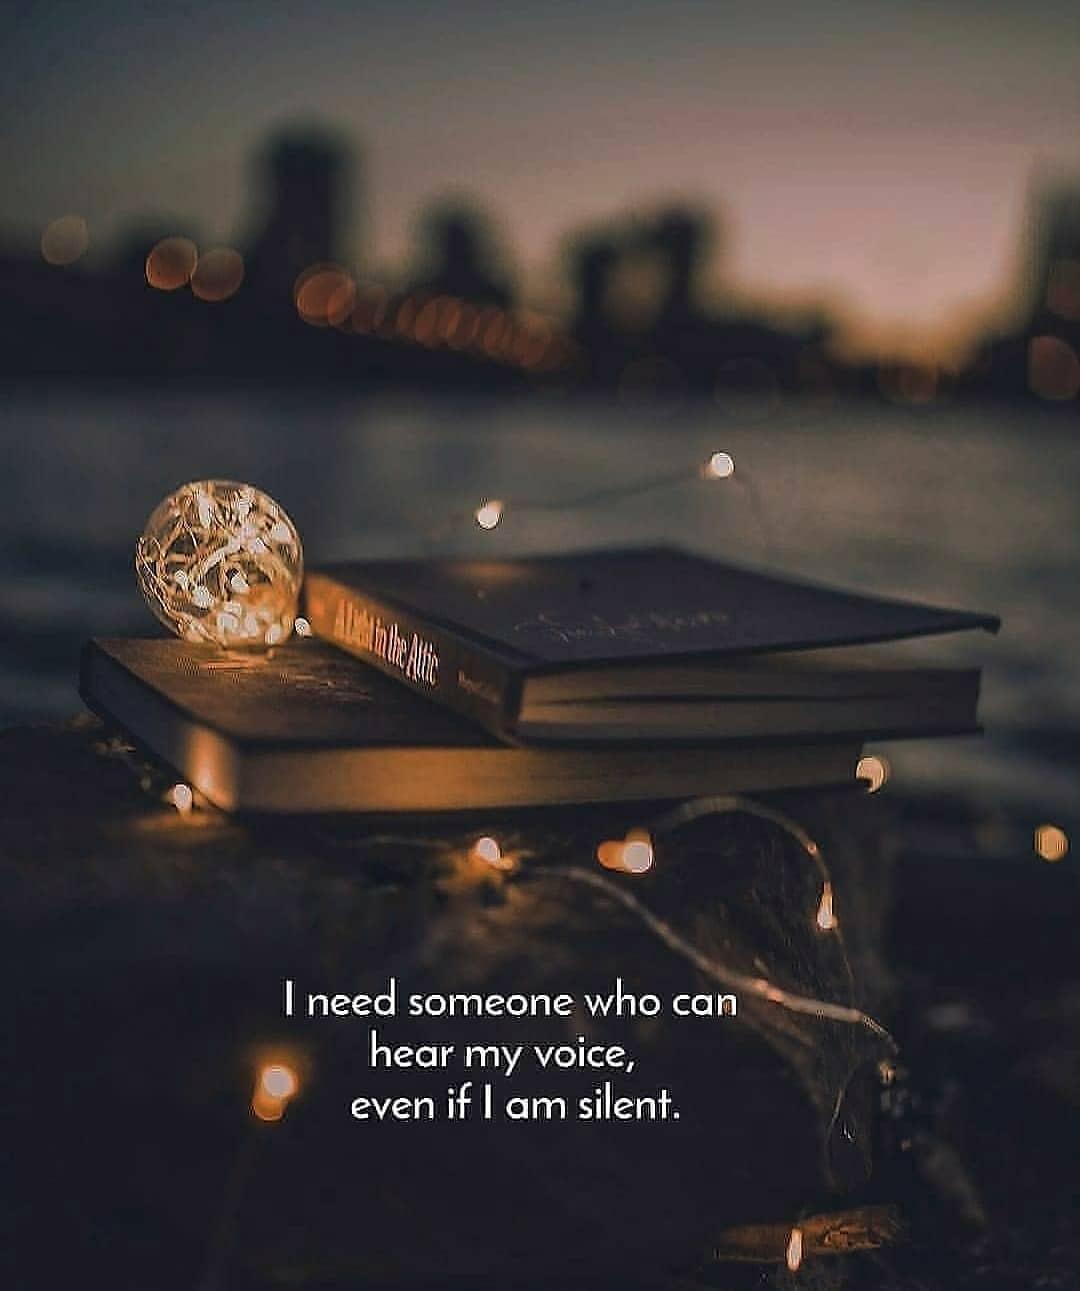 Being Hurt Quotes-Love Hurt Quotes | Pain Quotes,
Being Hurt Quotes and Sayings | Pain Quotes | Top Quotes About Being Hurt by Someone Close to You
